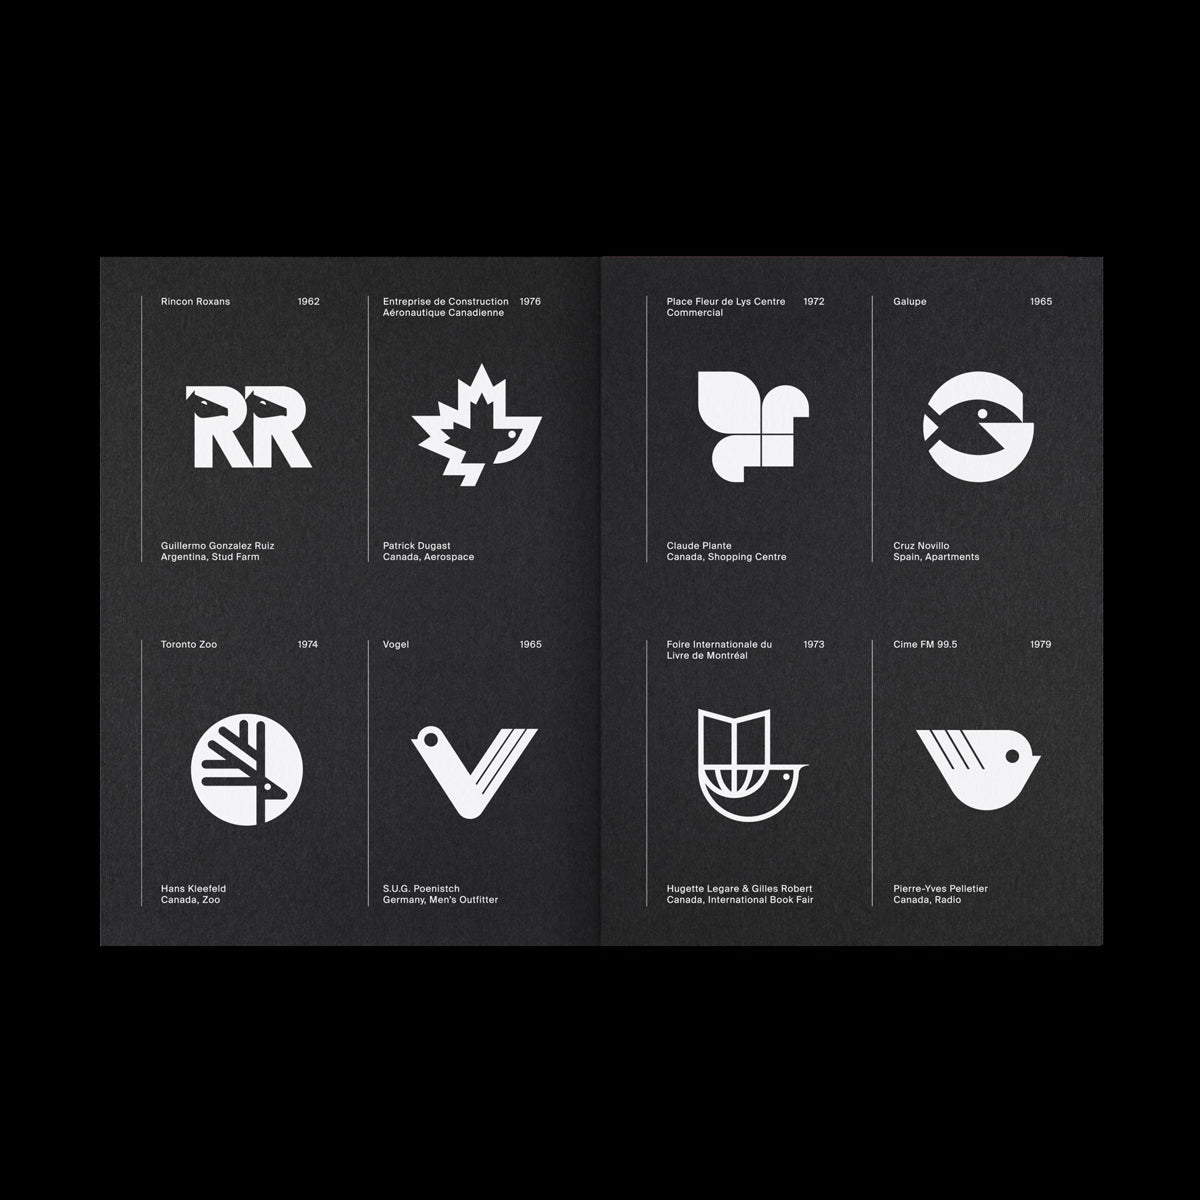 LogoArchive Issue 1